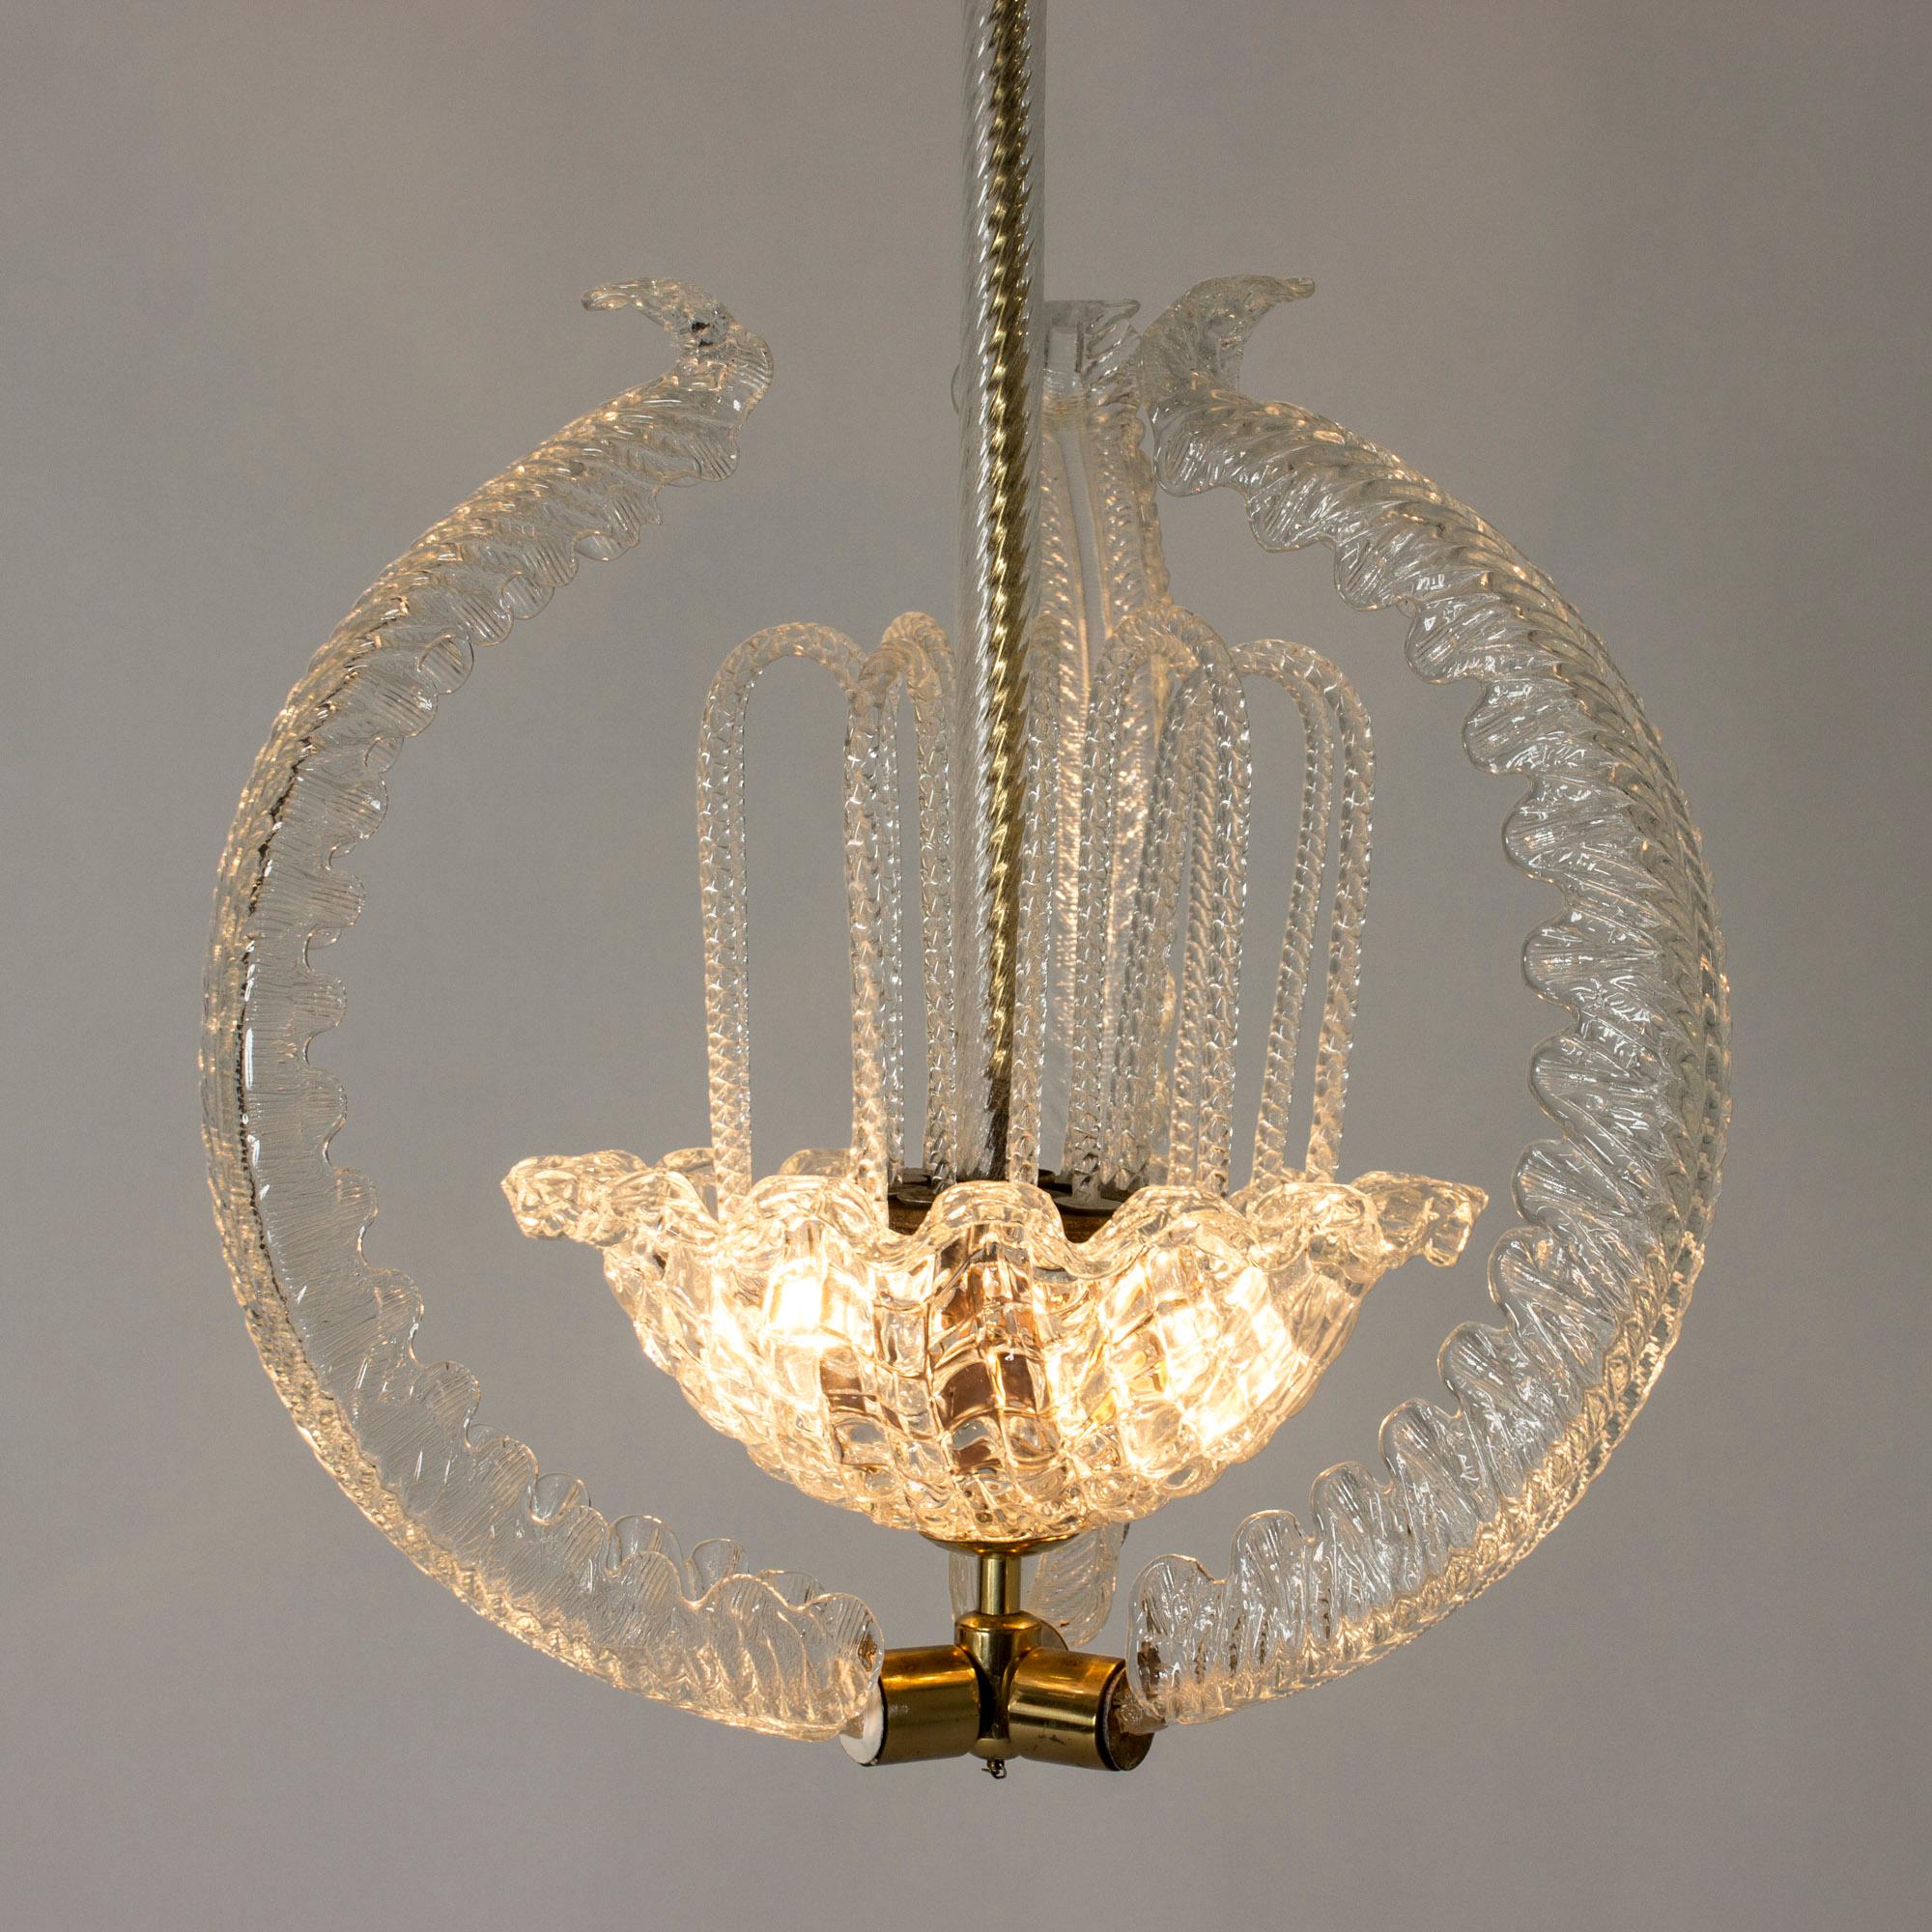 Exquisite handblown glass and brass chandelier by Fritz Kurz for Orrefors. Three glass feathers embrace a bowl in the middle with cascading glass inside. The brass pole and cup are encased in glass, the full effect of this chandelier is of a real